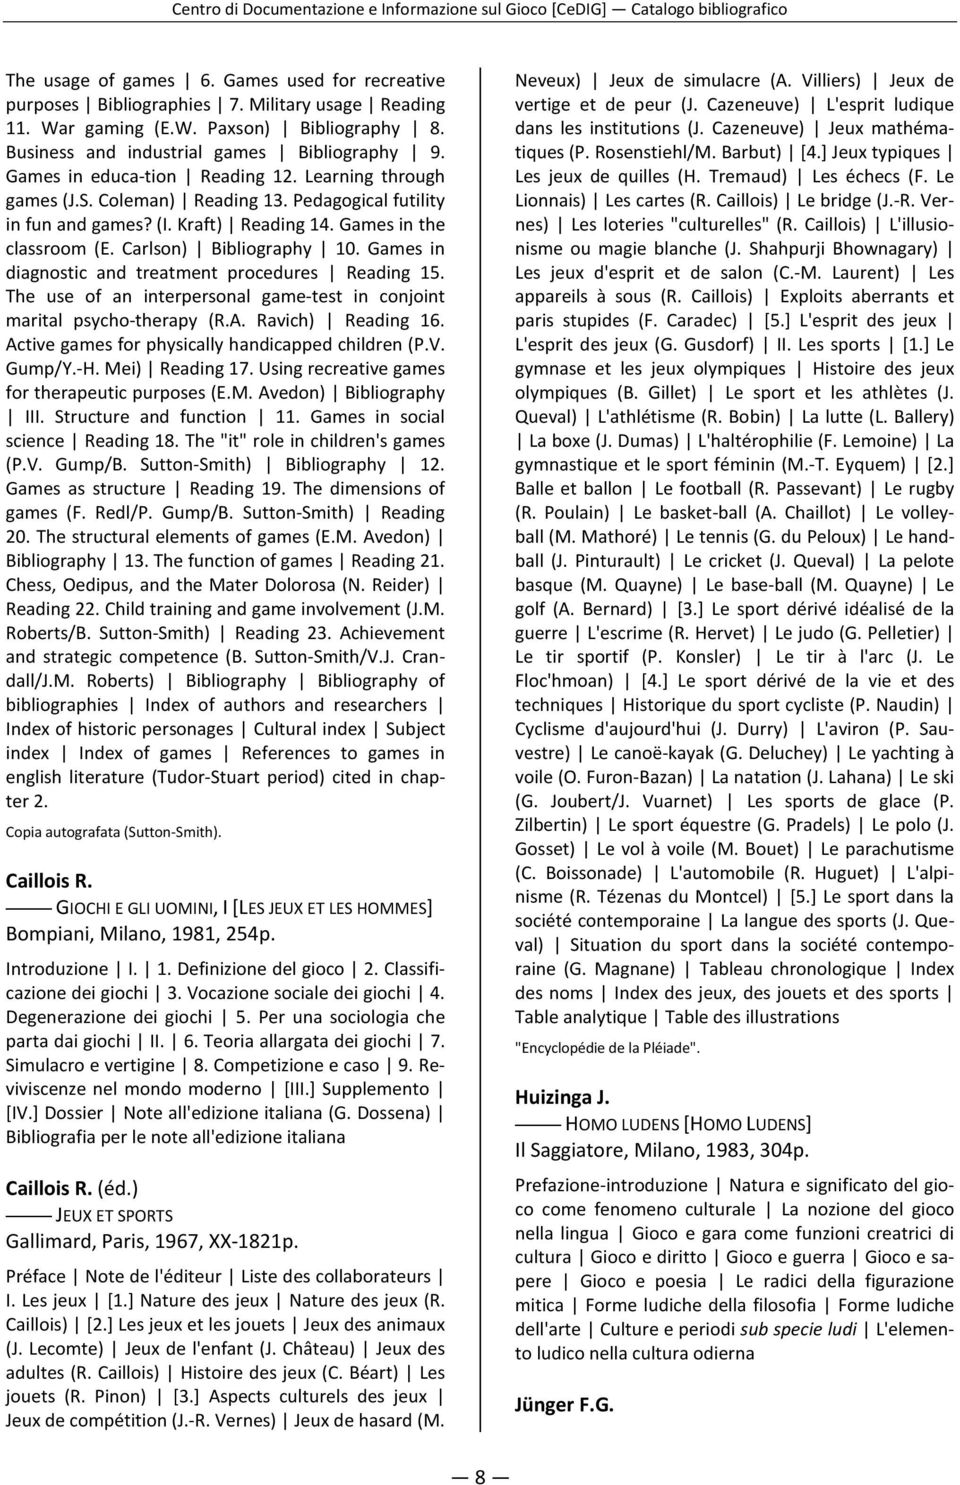 Games in diagnostic and treatment procedures Reading 15. The use of an interpersonal game-test in conjoint marital psycho-therapy (R.A. Ravich) Reading 16.